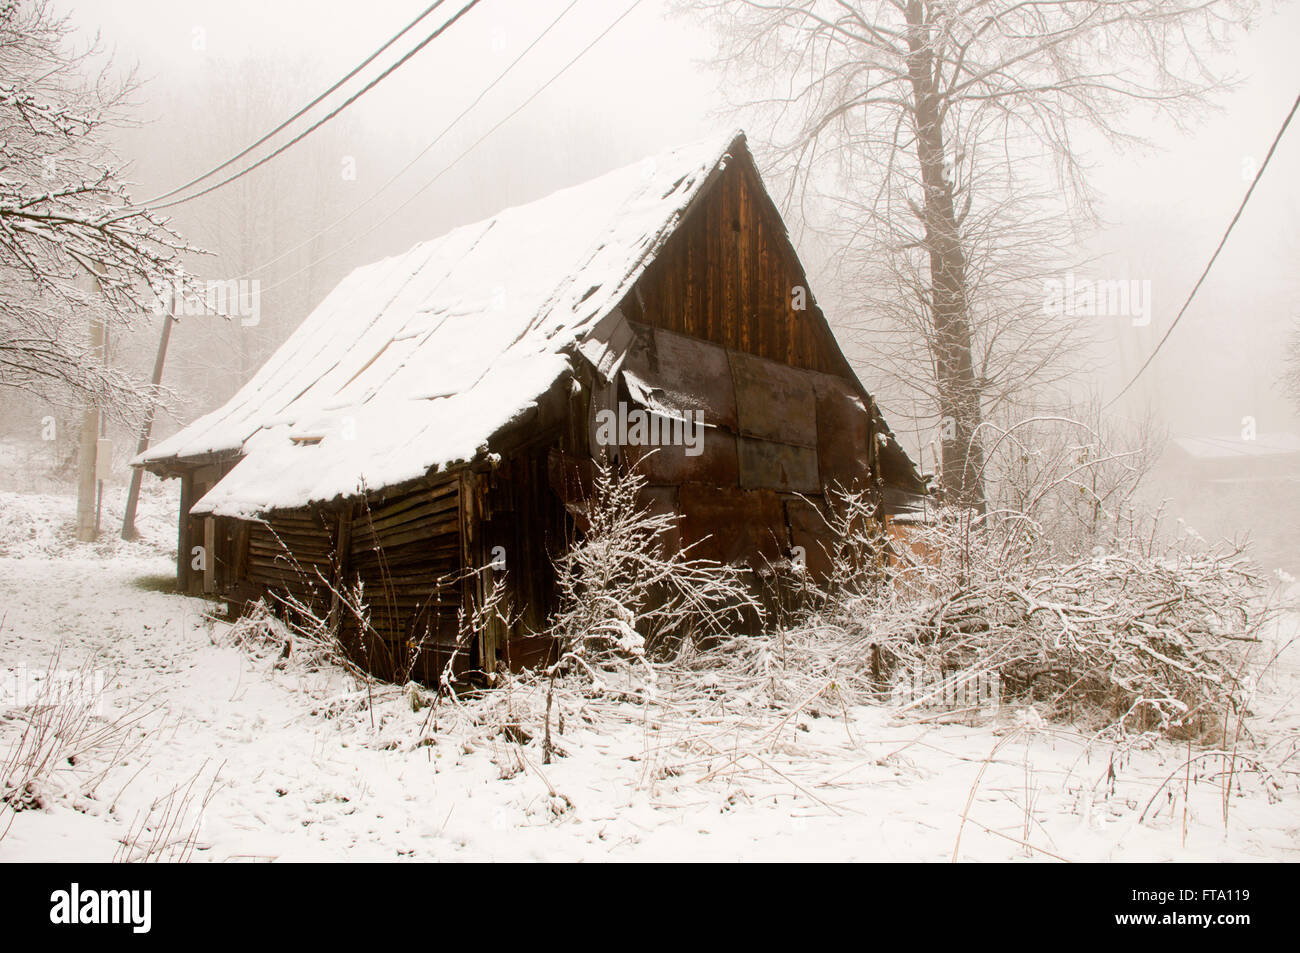 The old wooden cottage covered by whithe snow Stock Photo